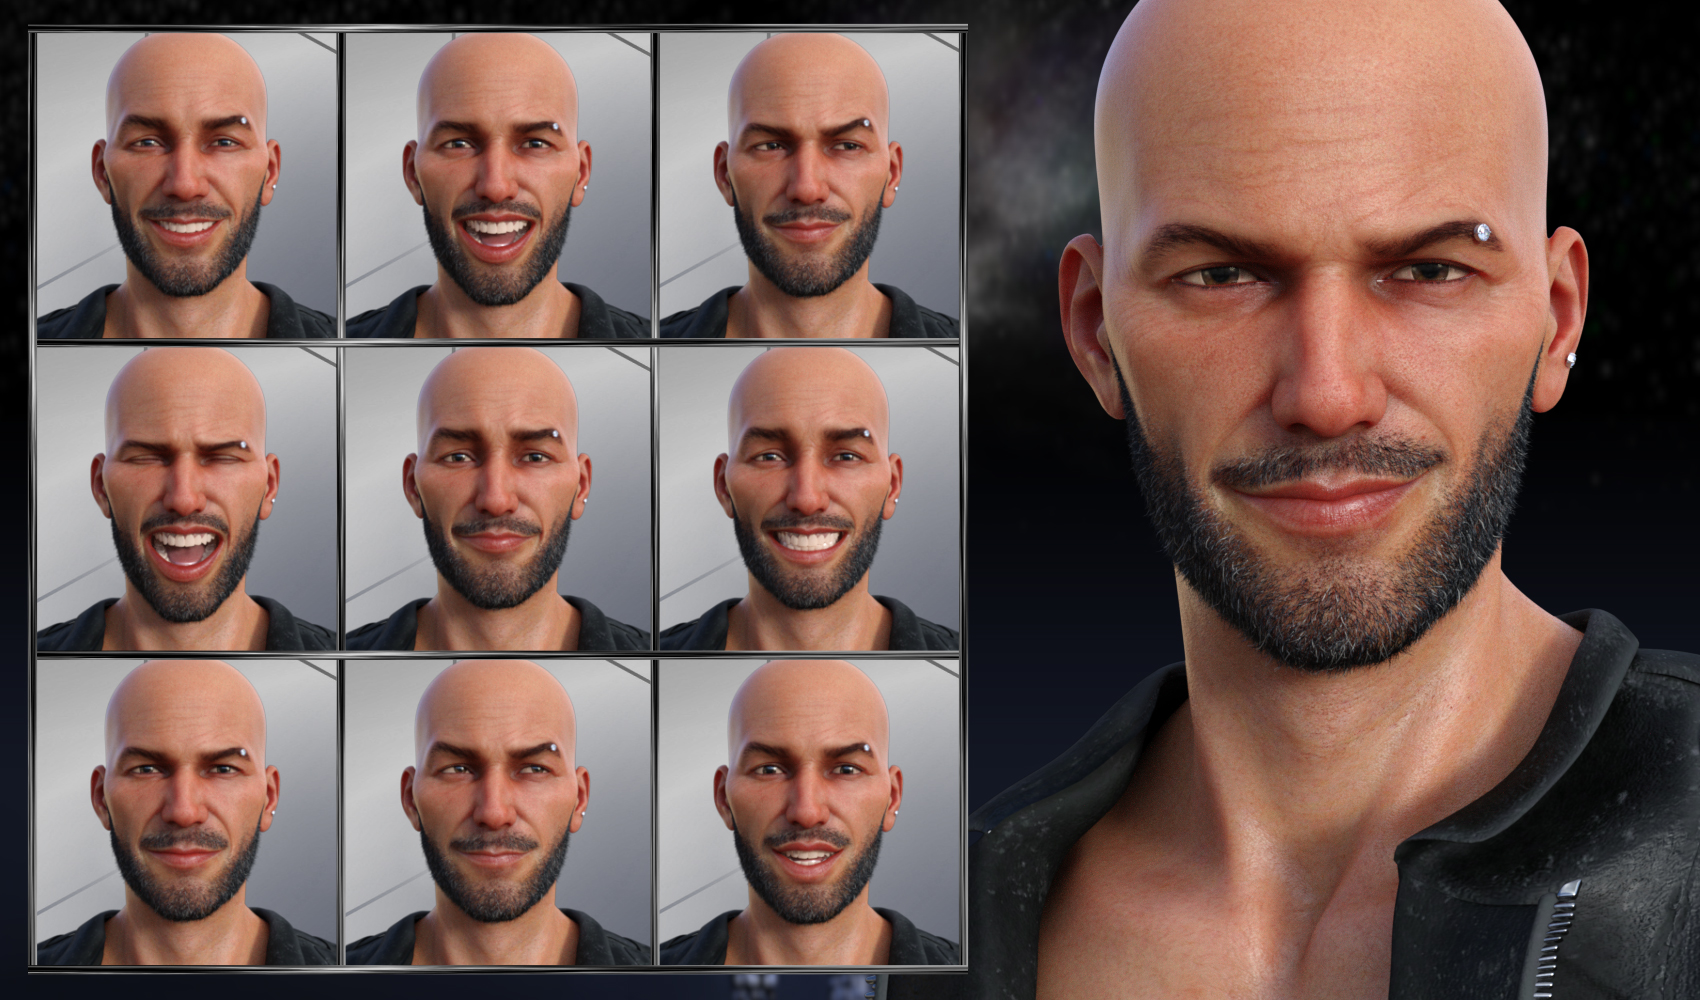 My Rules - Expressions for Genesis 8 Male and Christian 8 by: JWolf, 3D Models by Daz 3D